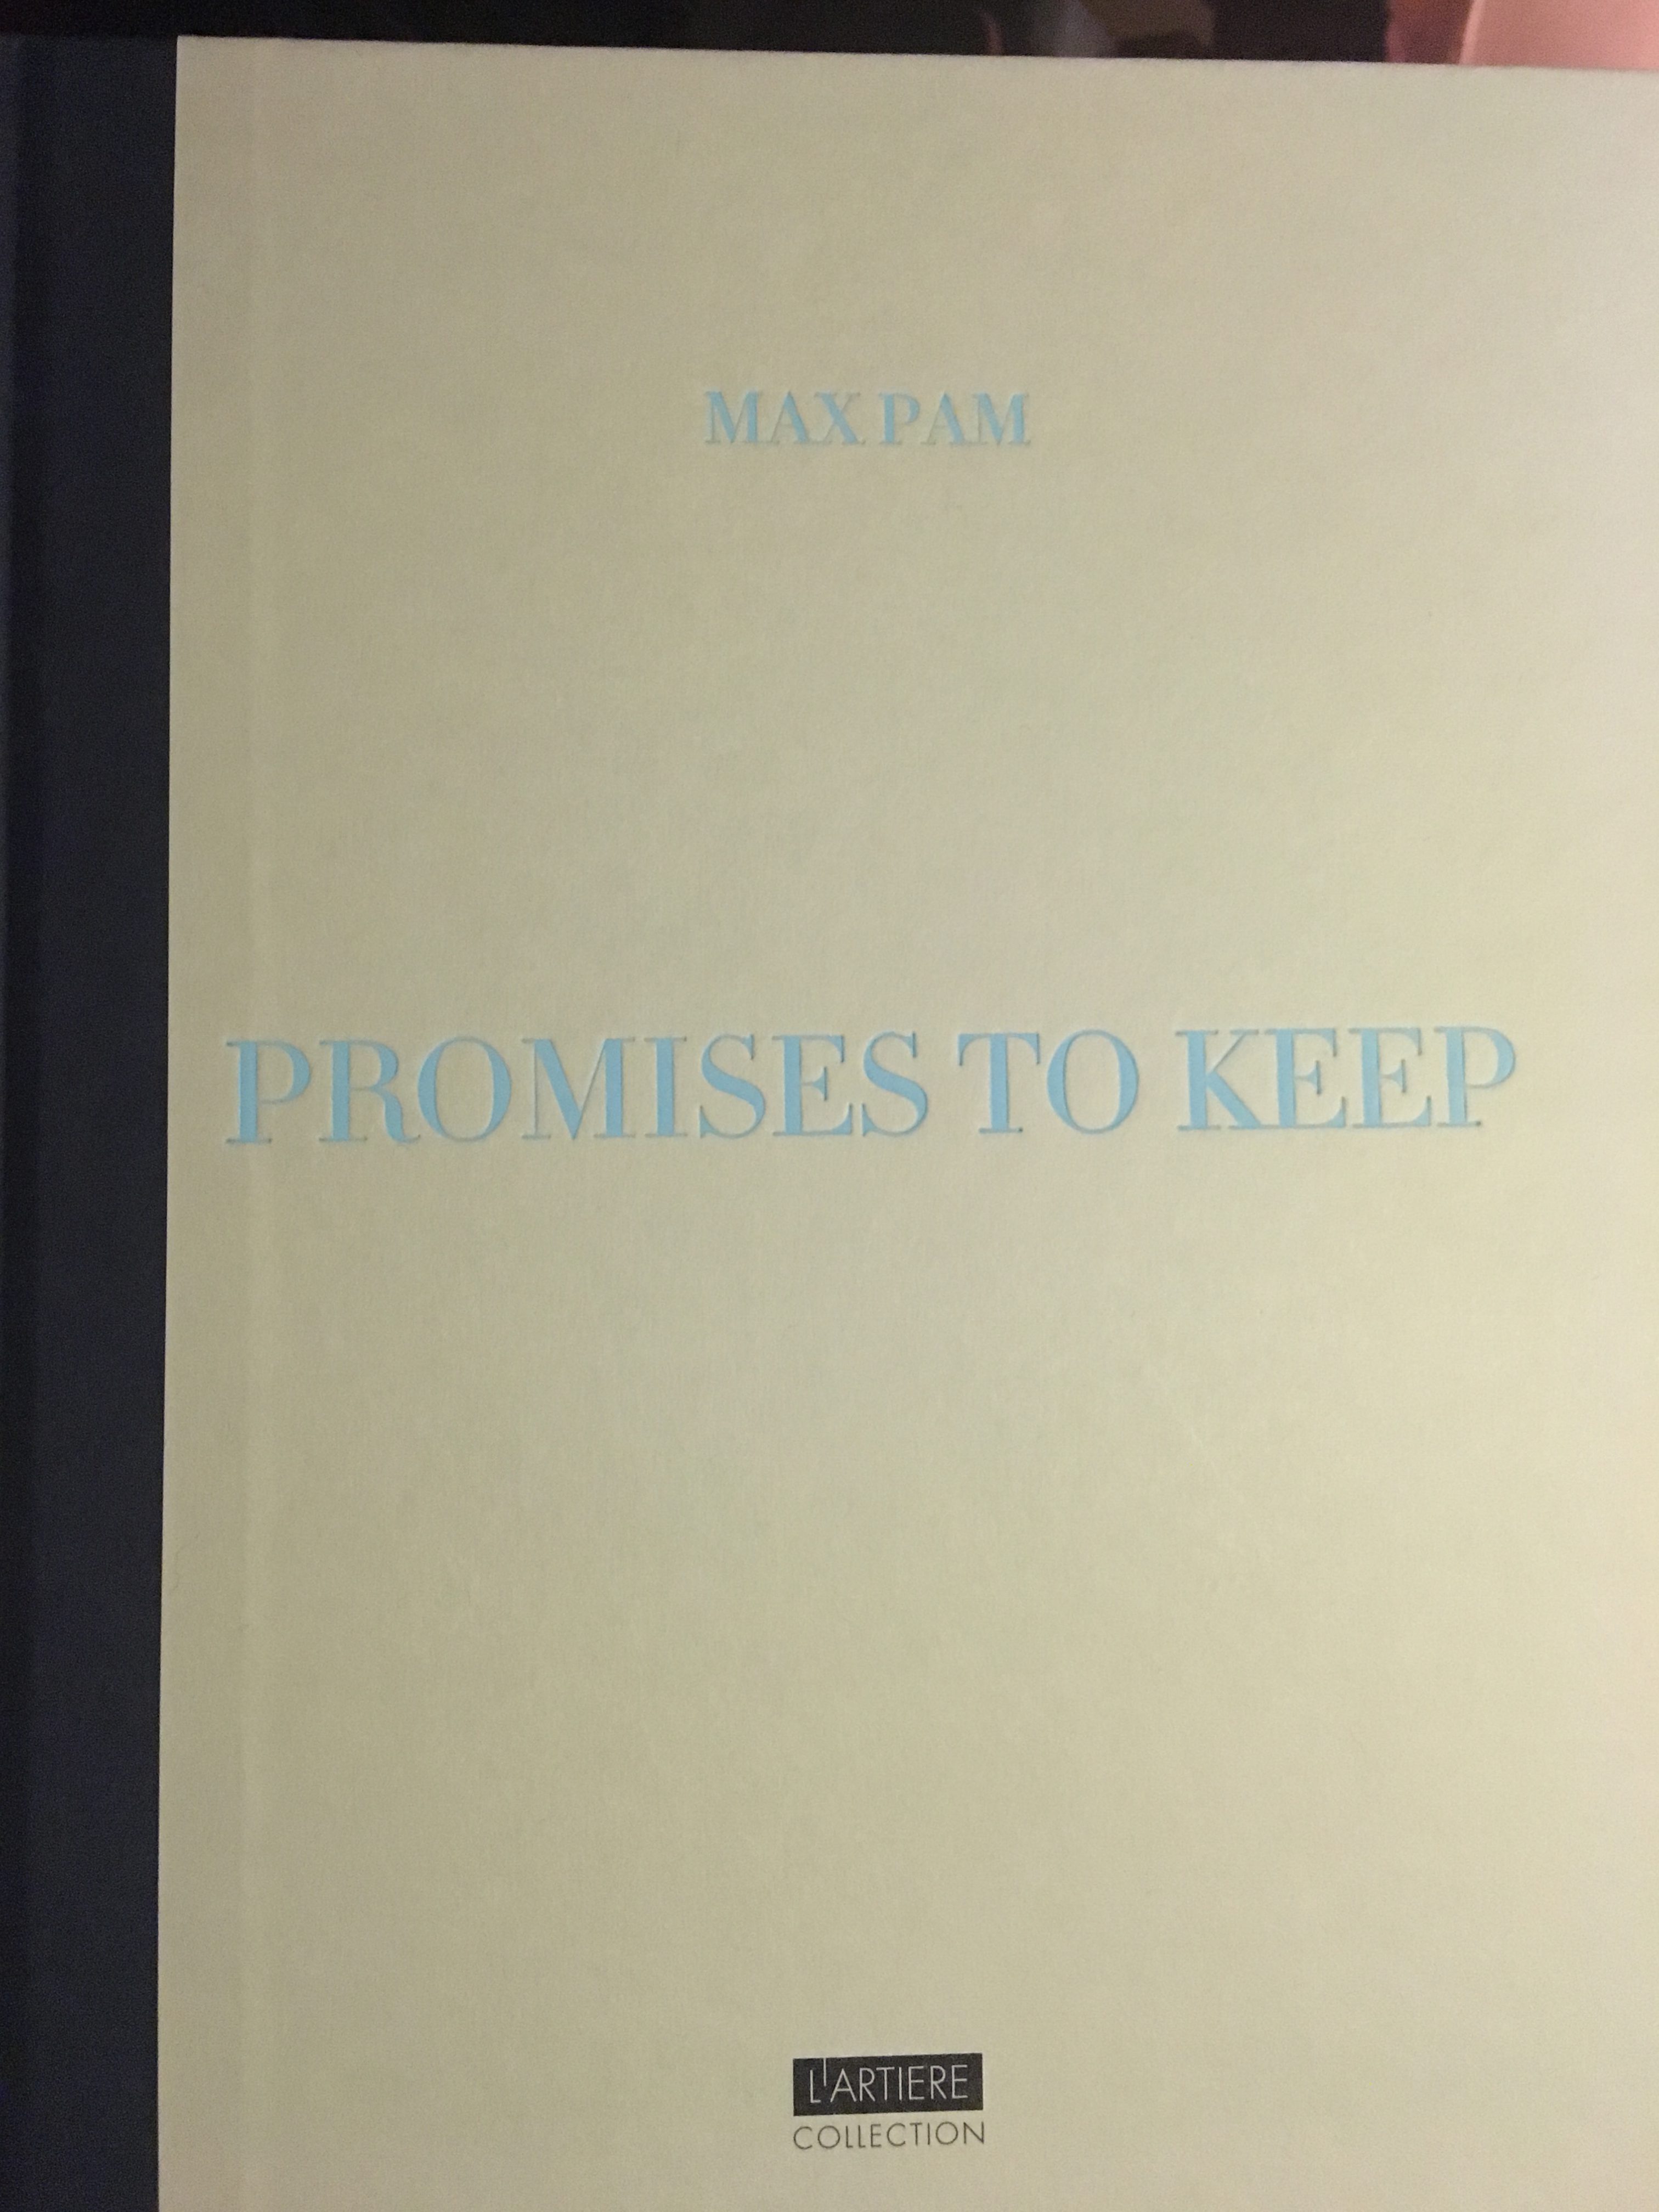 Promises to Keep Book Cover